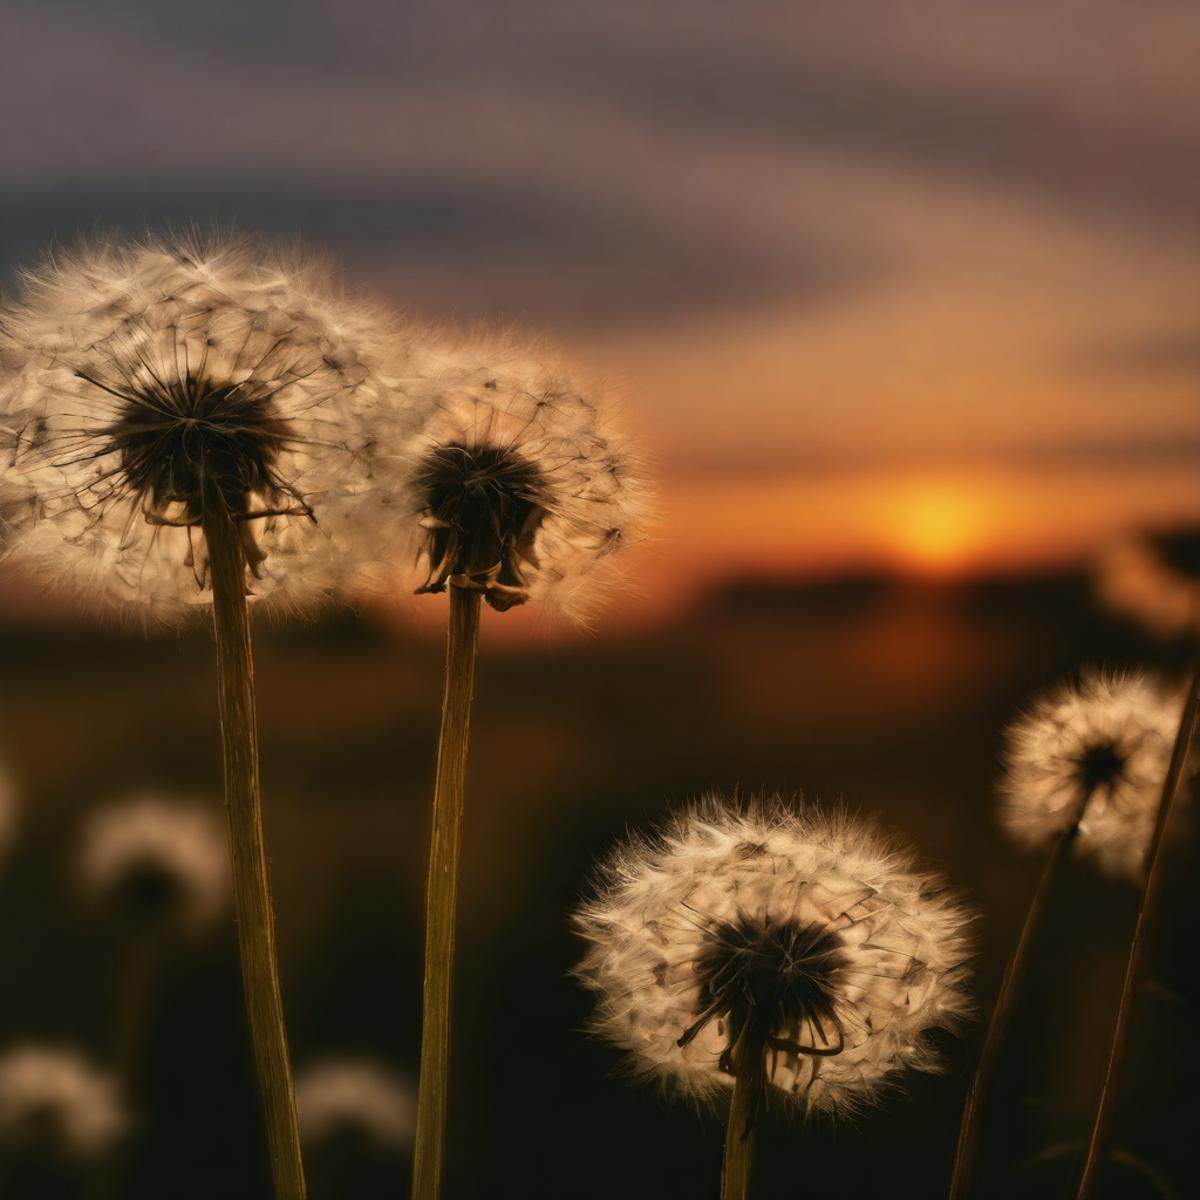 Dandelions in a field with a sunset in the background.